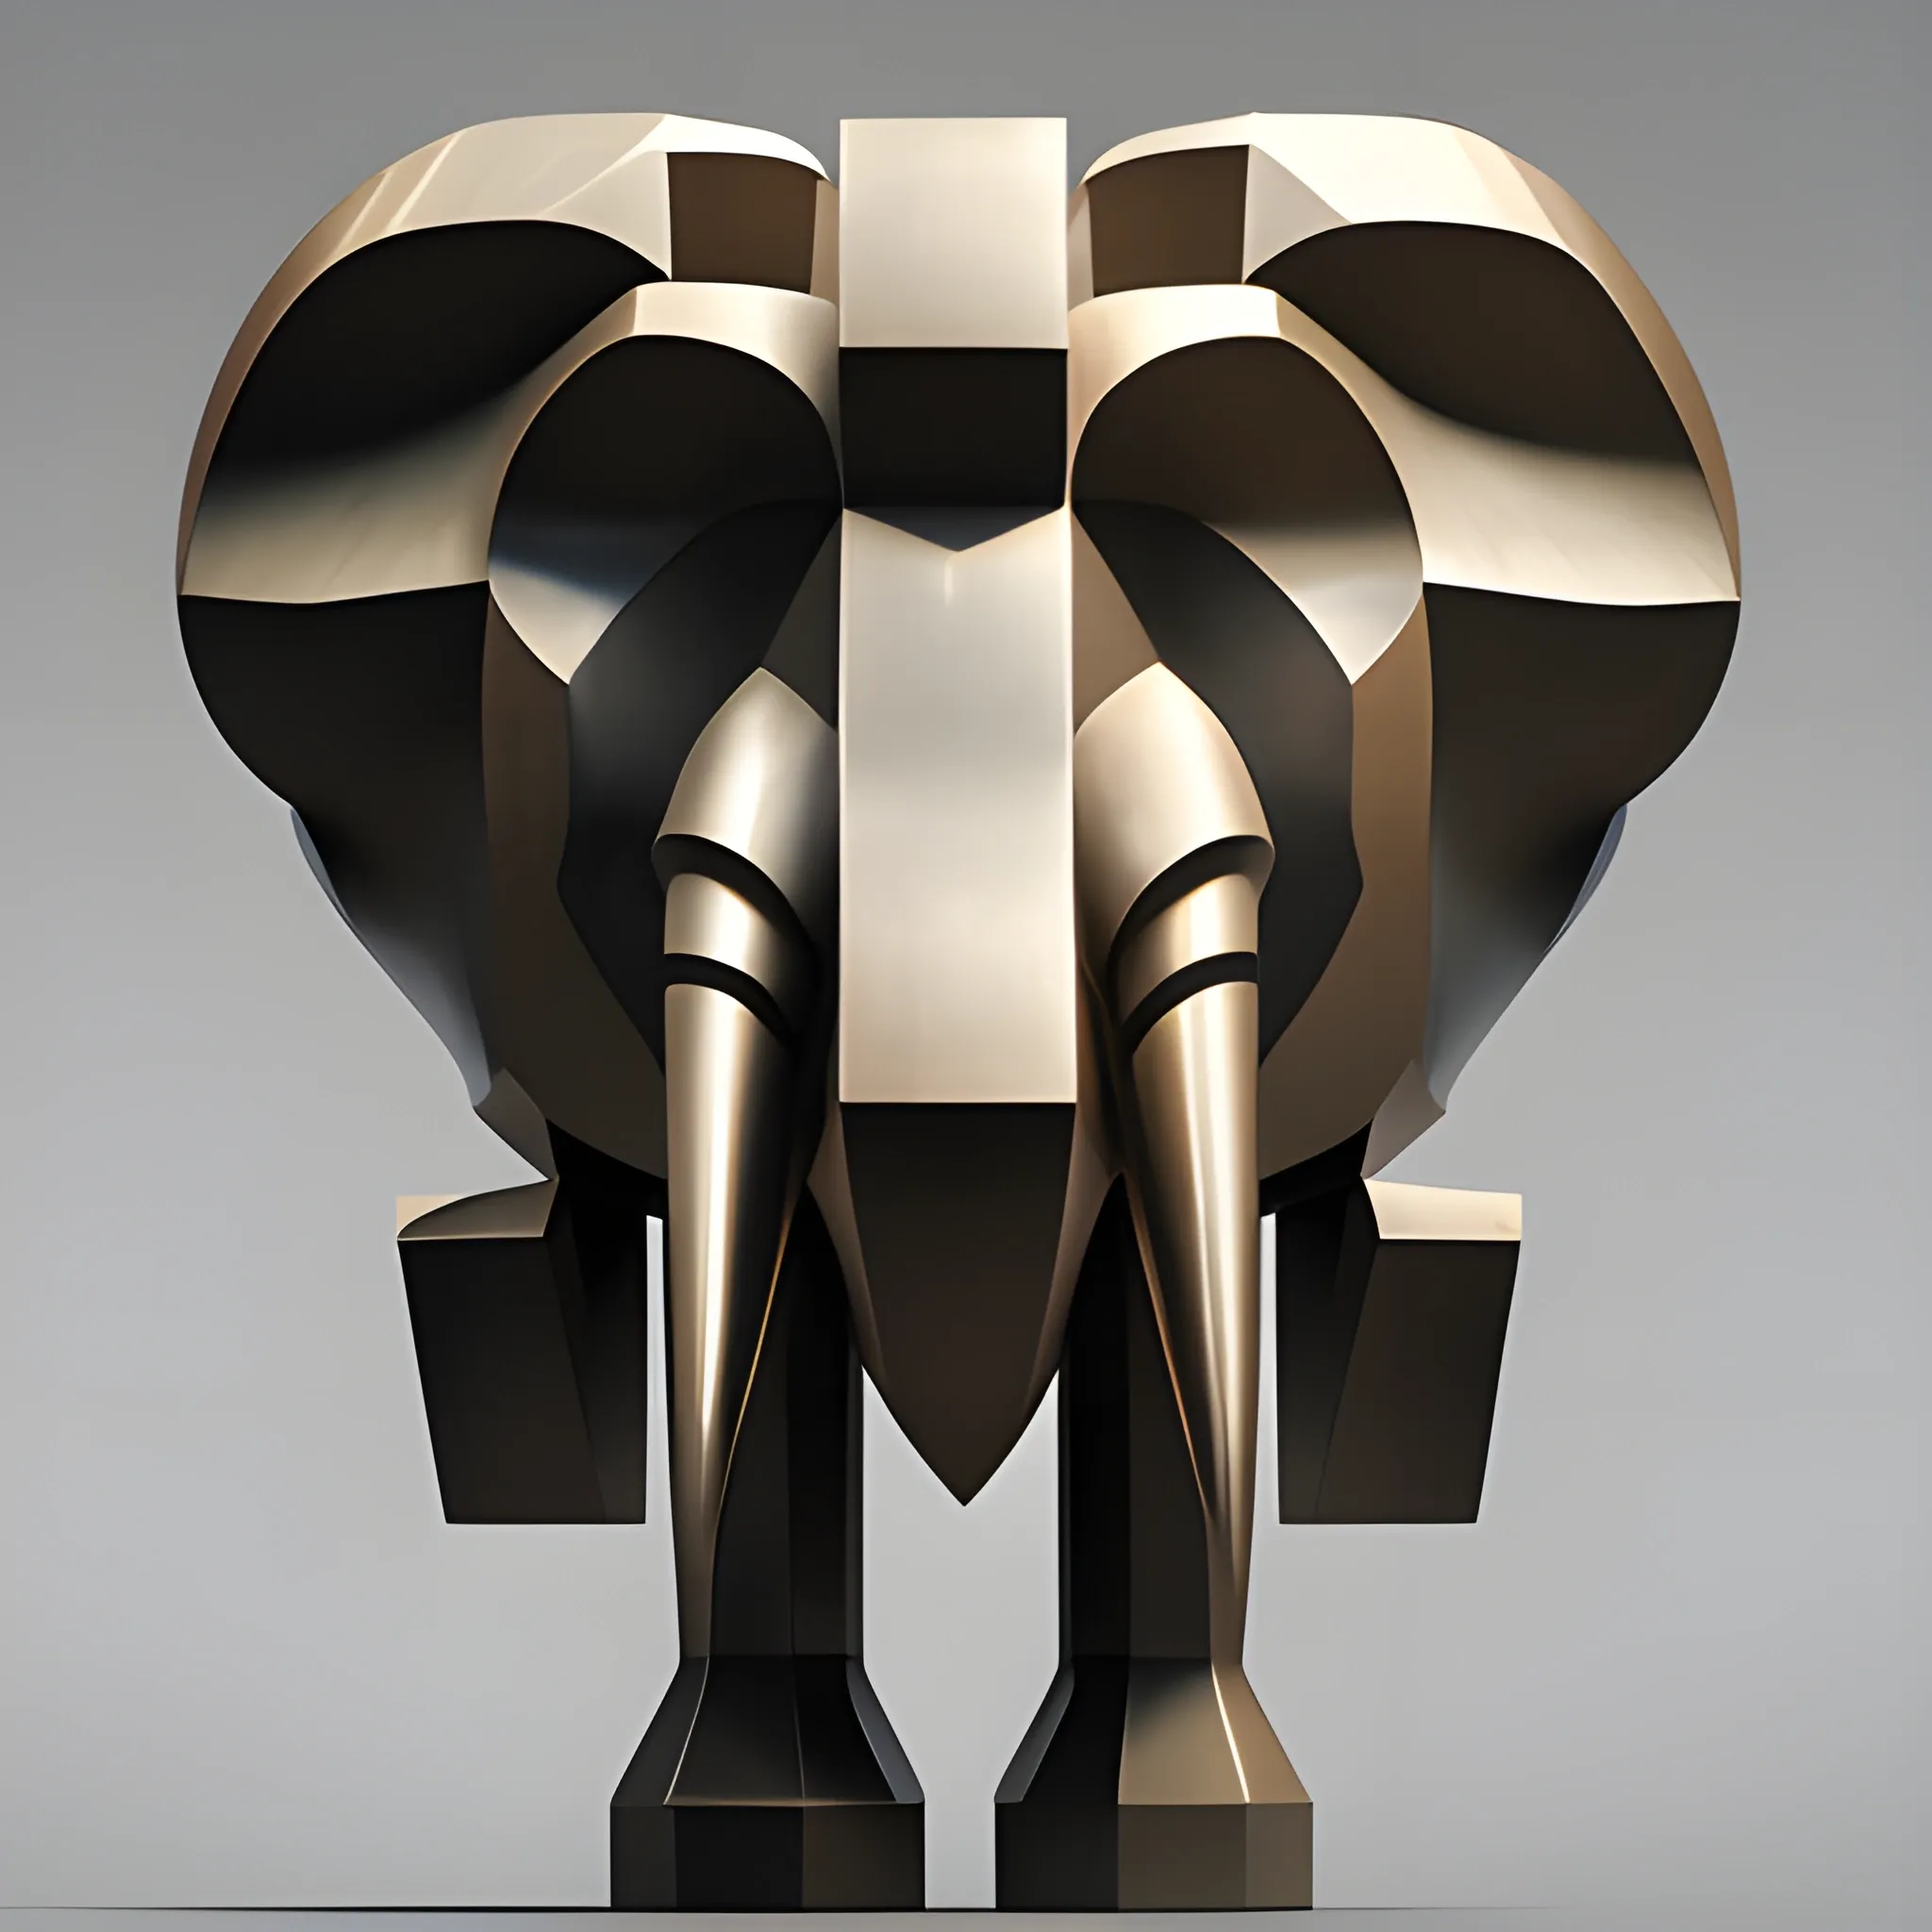 sculptural set in cubism Brancusi style , Big metalical Elephant featured native polynesian mask, gear and riveted steel, digital matte realistic surface, sharp focus, elegant intricate digital painting, abstract concept, art global illumination, ray tracing advanced technology, simple composition, elegant shapes, glam monumental, low perspective look, not horn,  big two fangs, big long trunk

